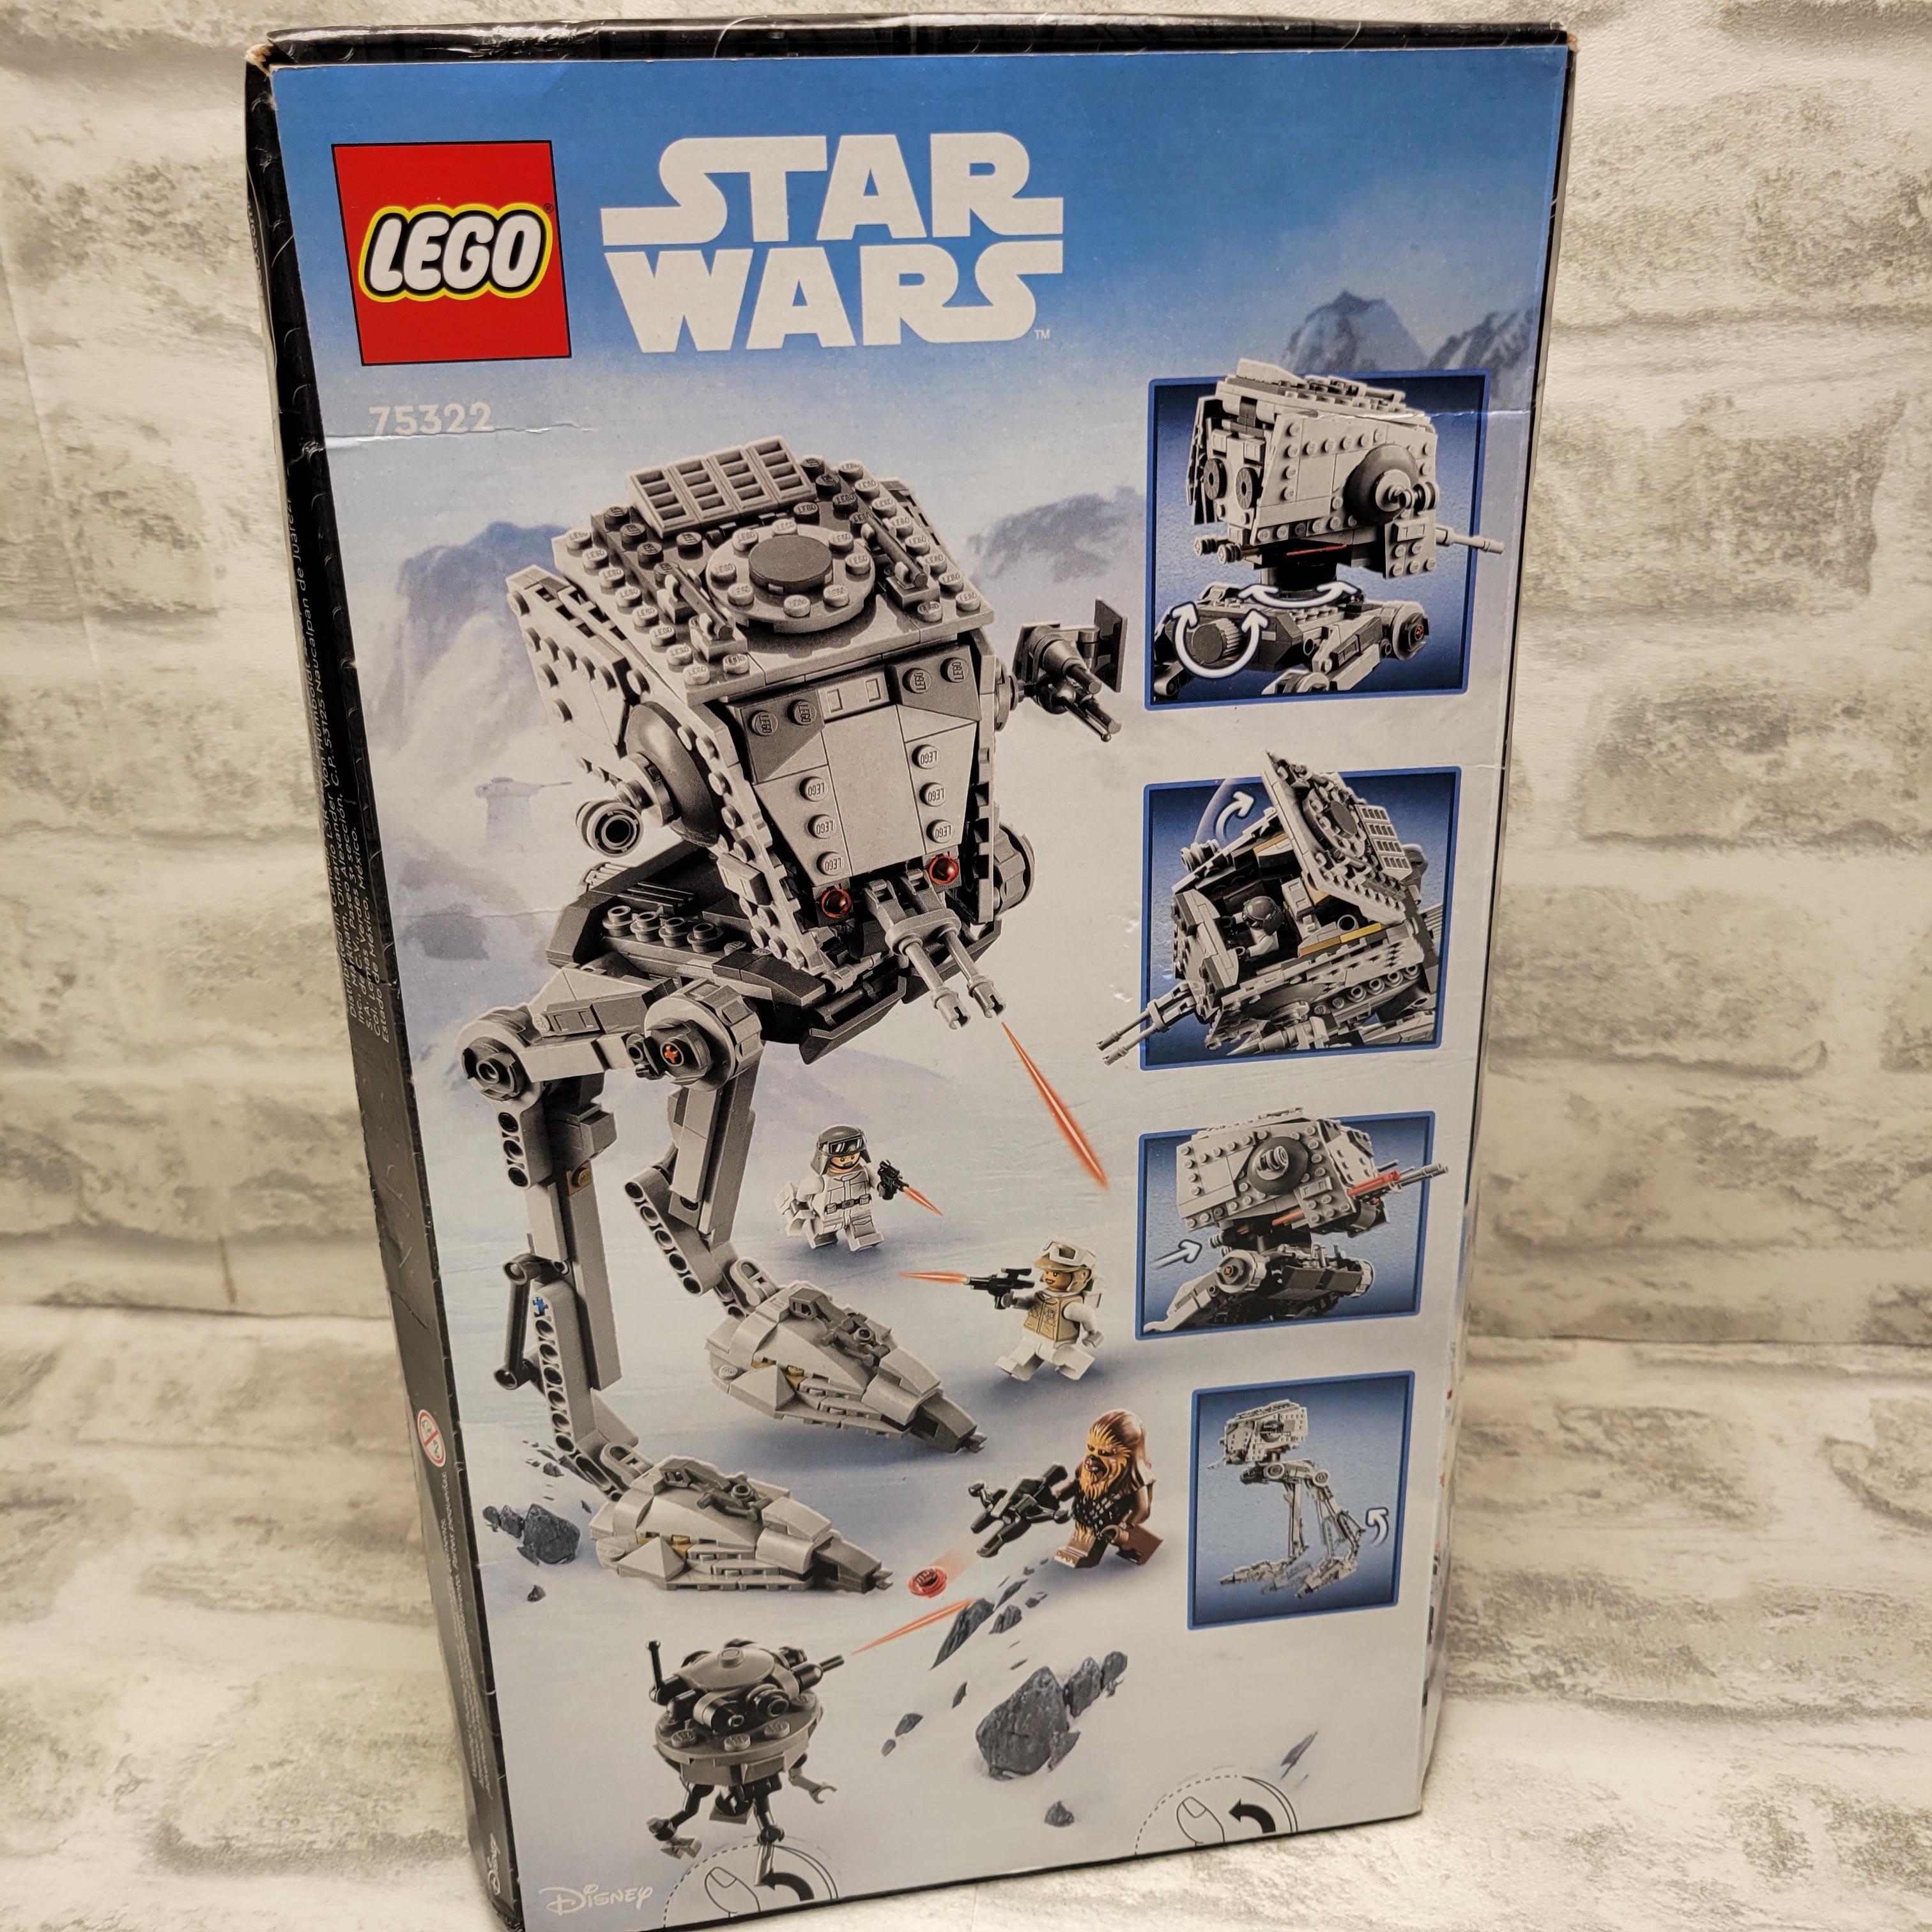 LEGO Star Wars Hoth at-ST 75322 Building Kit (586 Pieces)